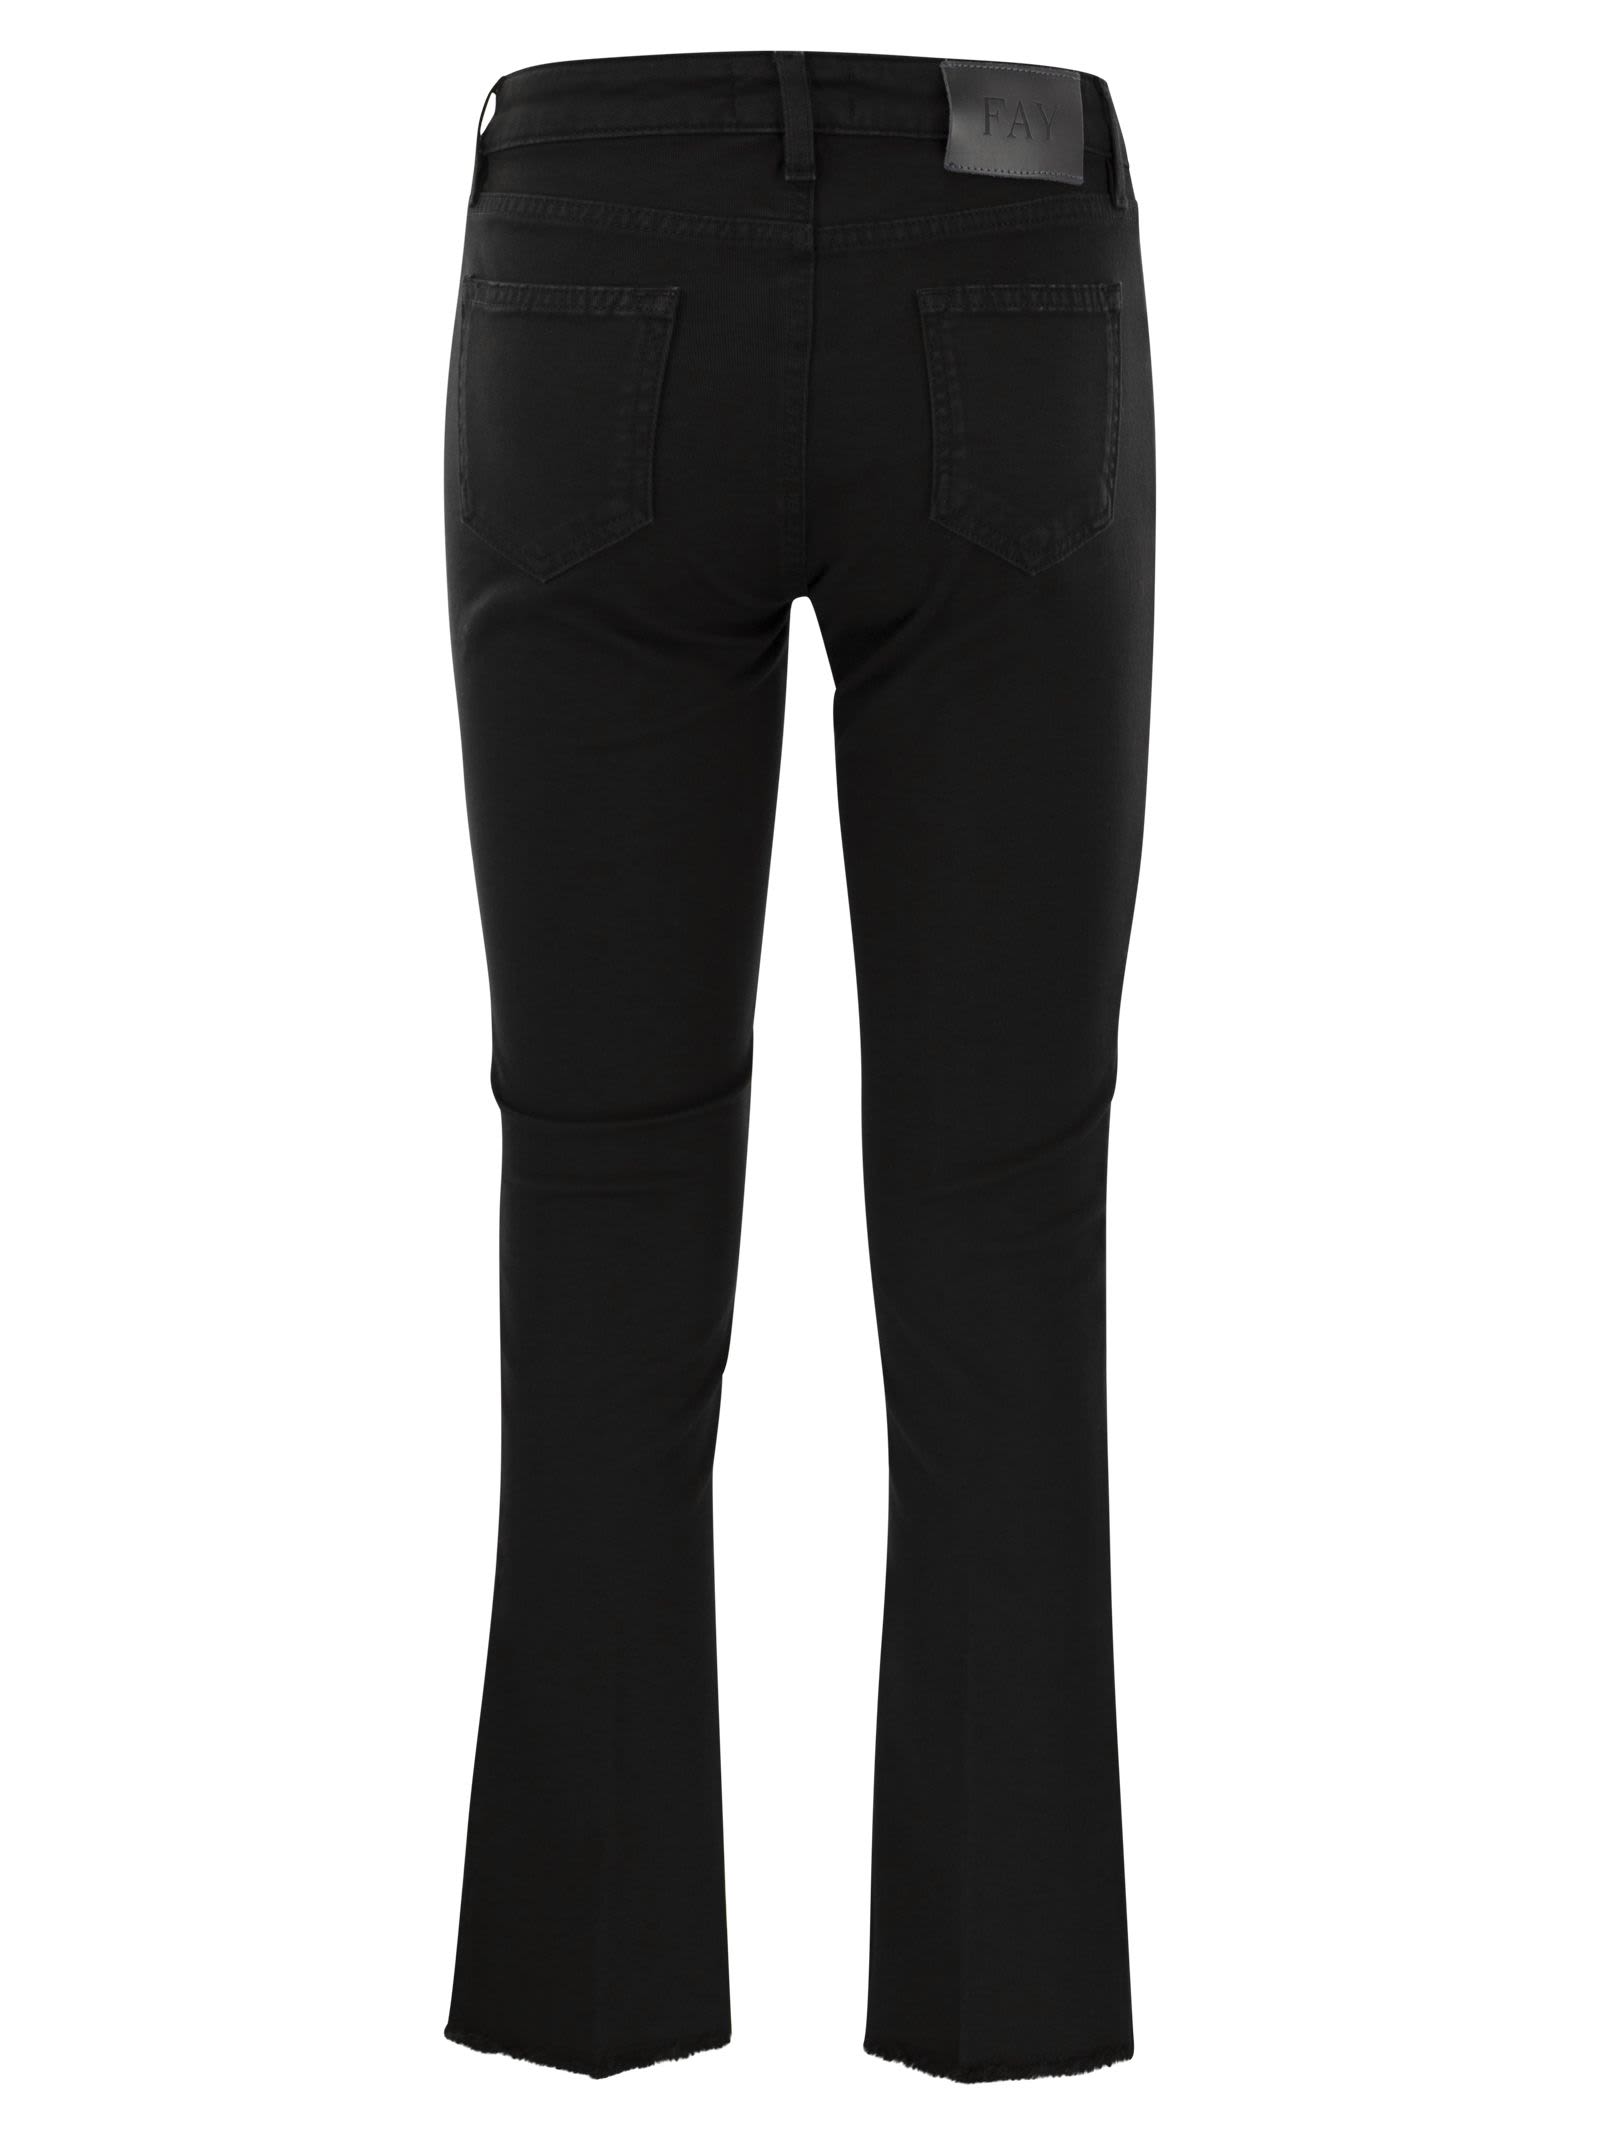 Shop Fay 5-pocket Trousers In Stretch Cotton.